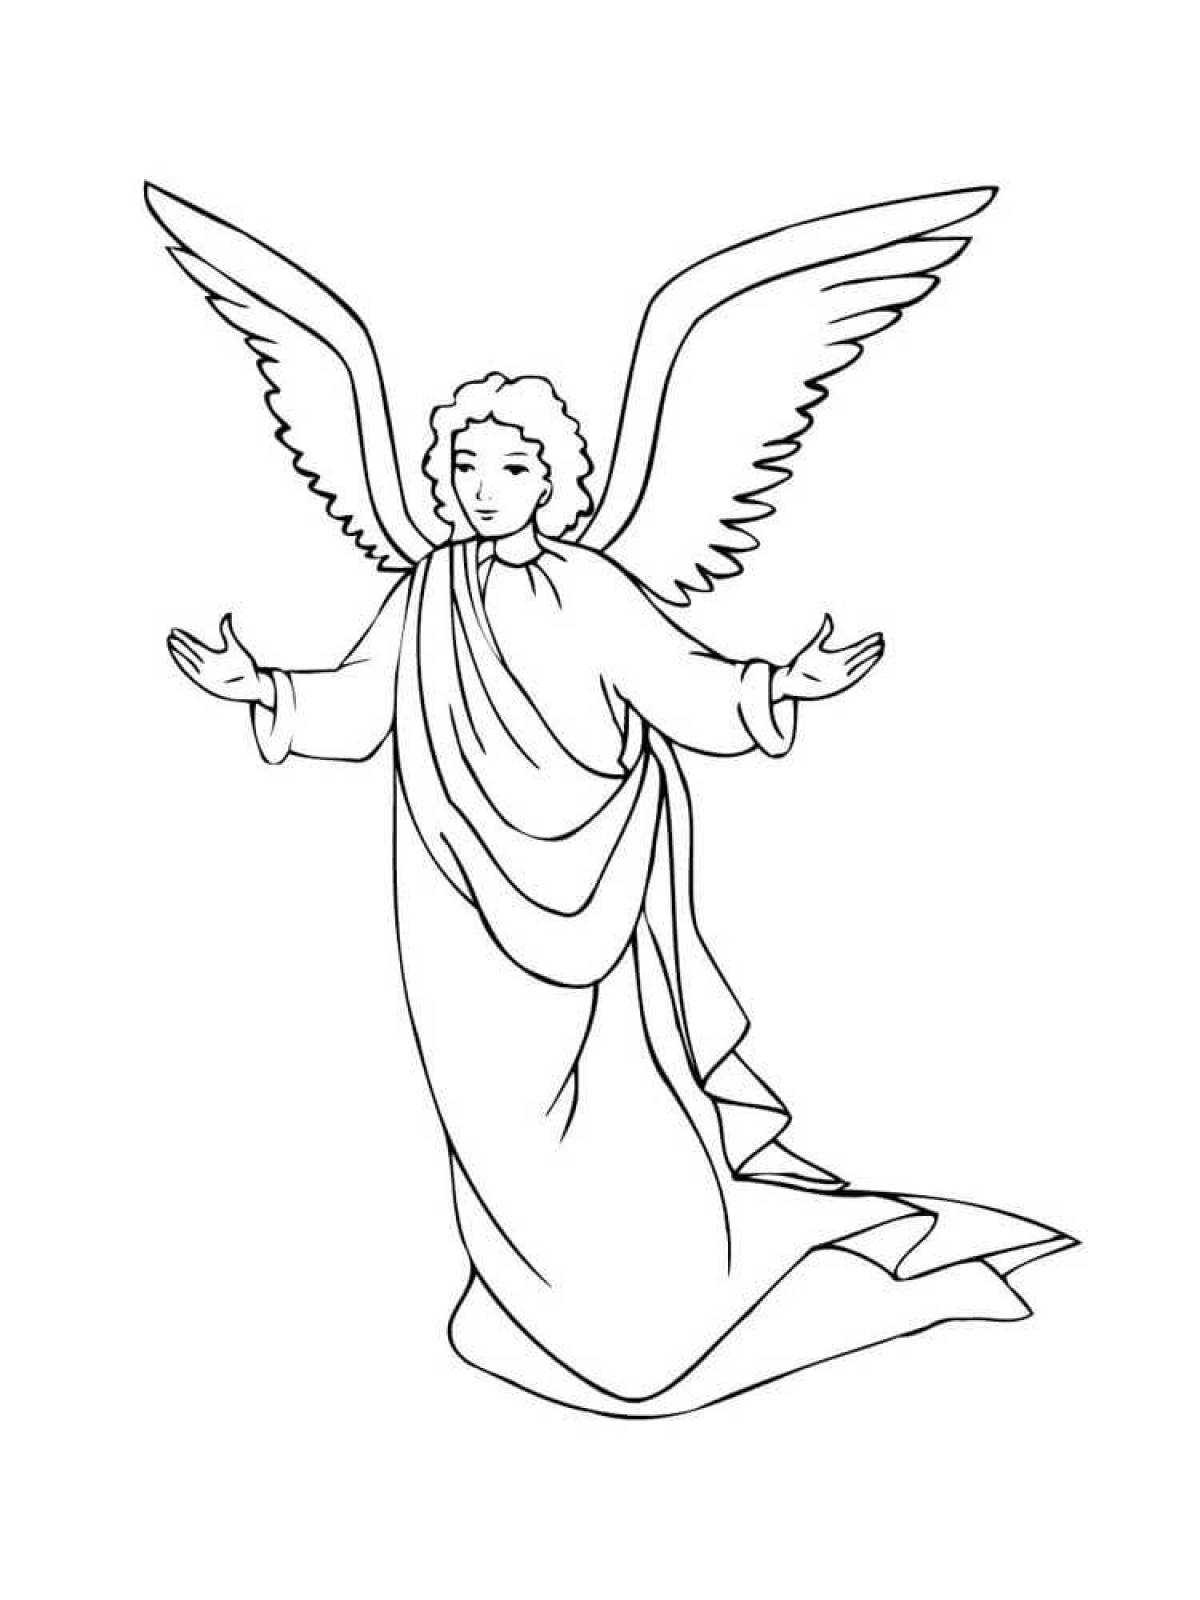 Sky-blessed angel coloring book